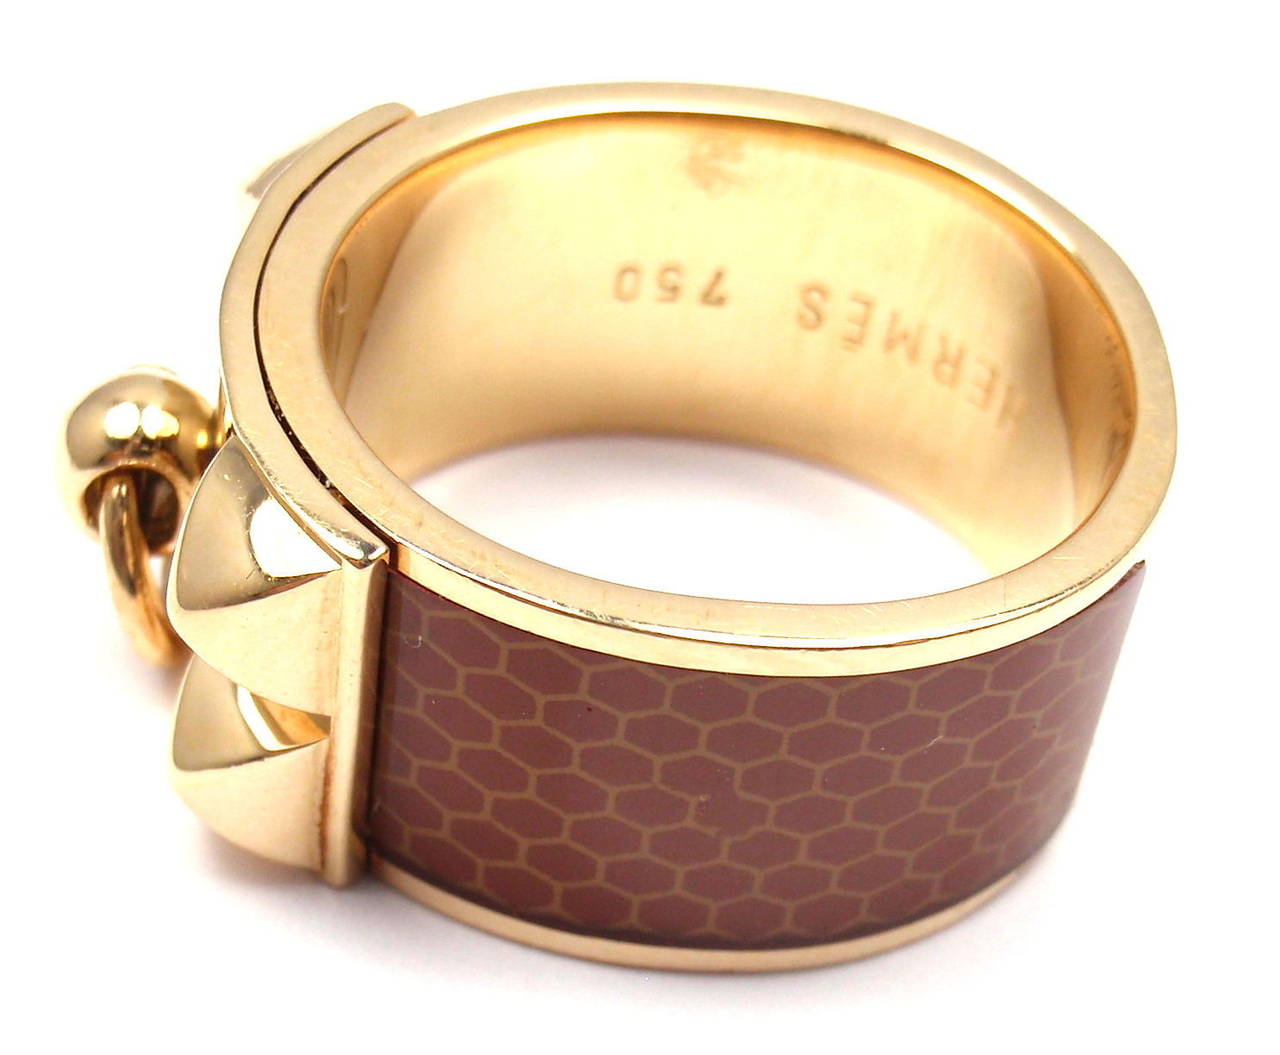 18k Yellow Gold Collier De Chien Enamel Ring by Hermes. 

Details: 
Ring Size: 53 US 6.25
Weight: 14.4 grams
Width: 11mm
Stamped Hallmarks: Hermes 750 53 19801
*Free Shipping within the United States* 

YOUR PRICE: $3,000

0490mtdd